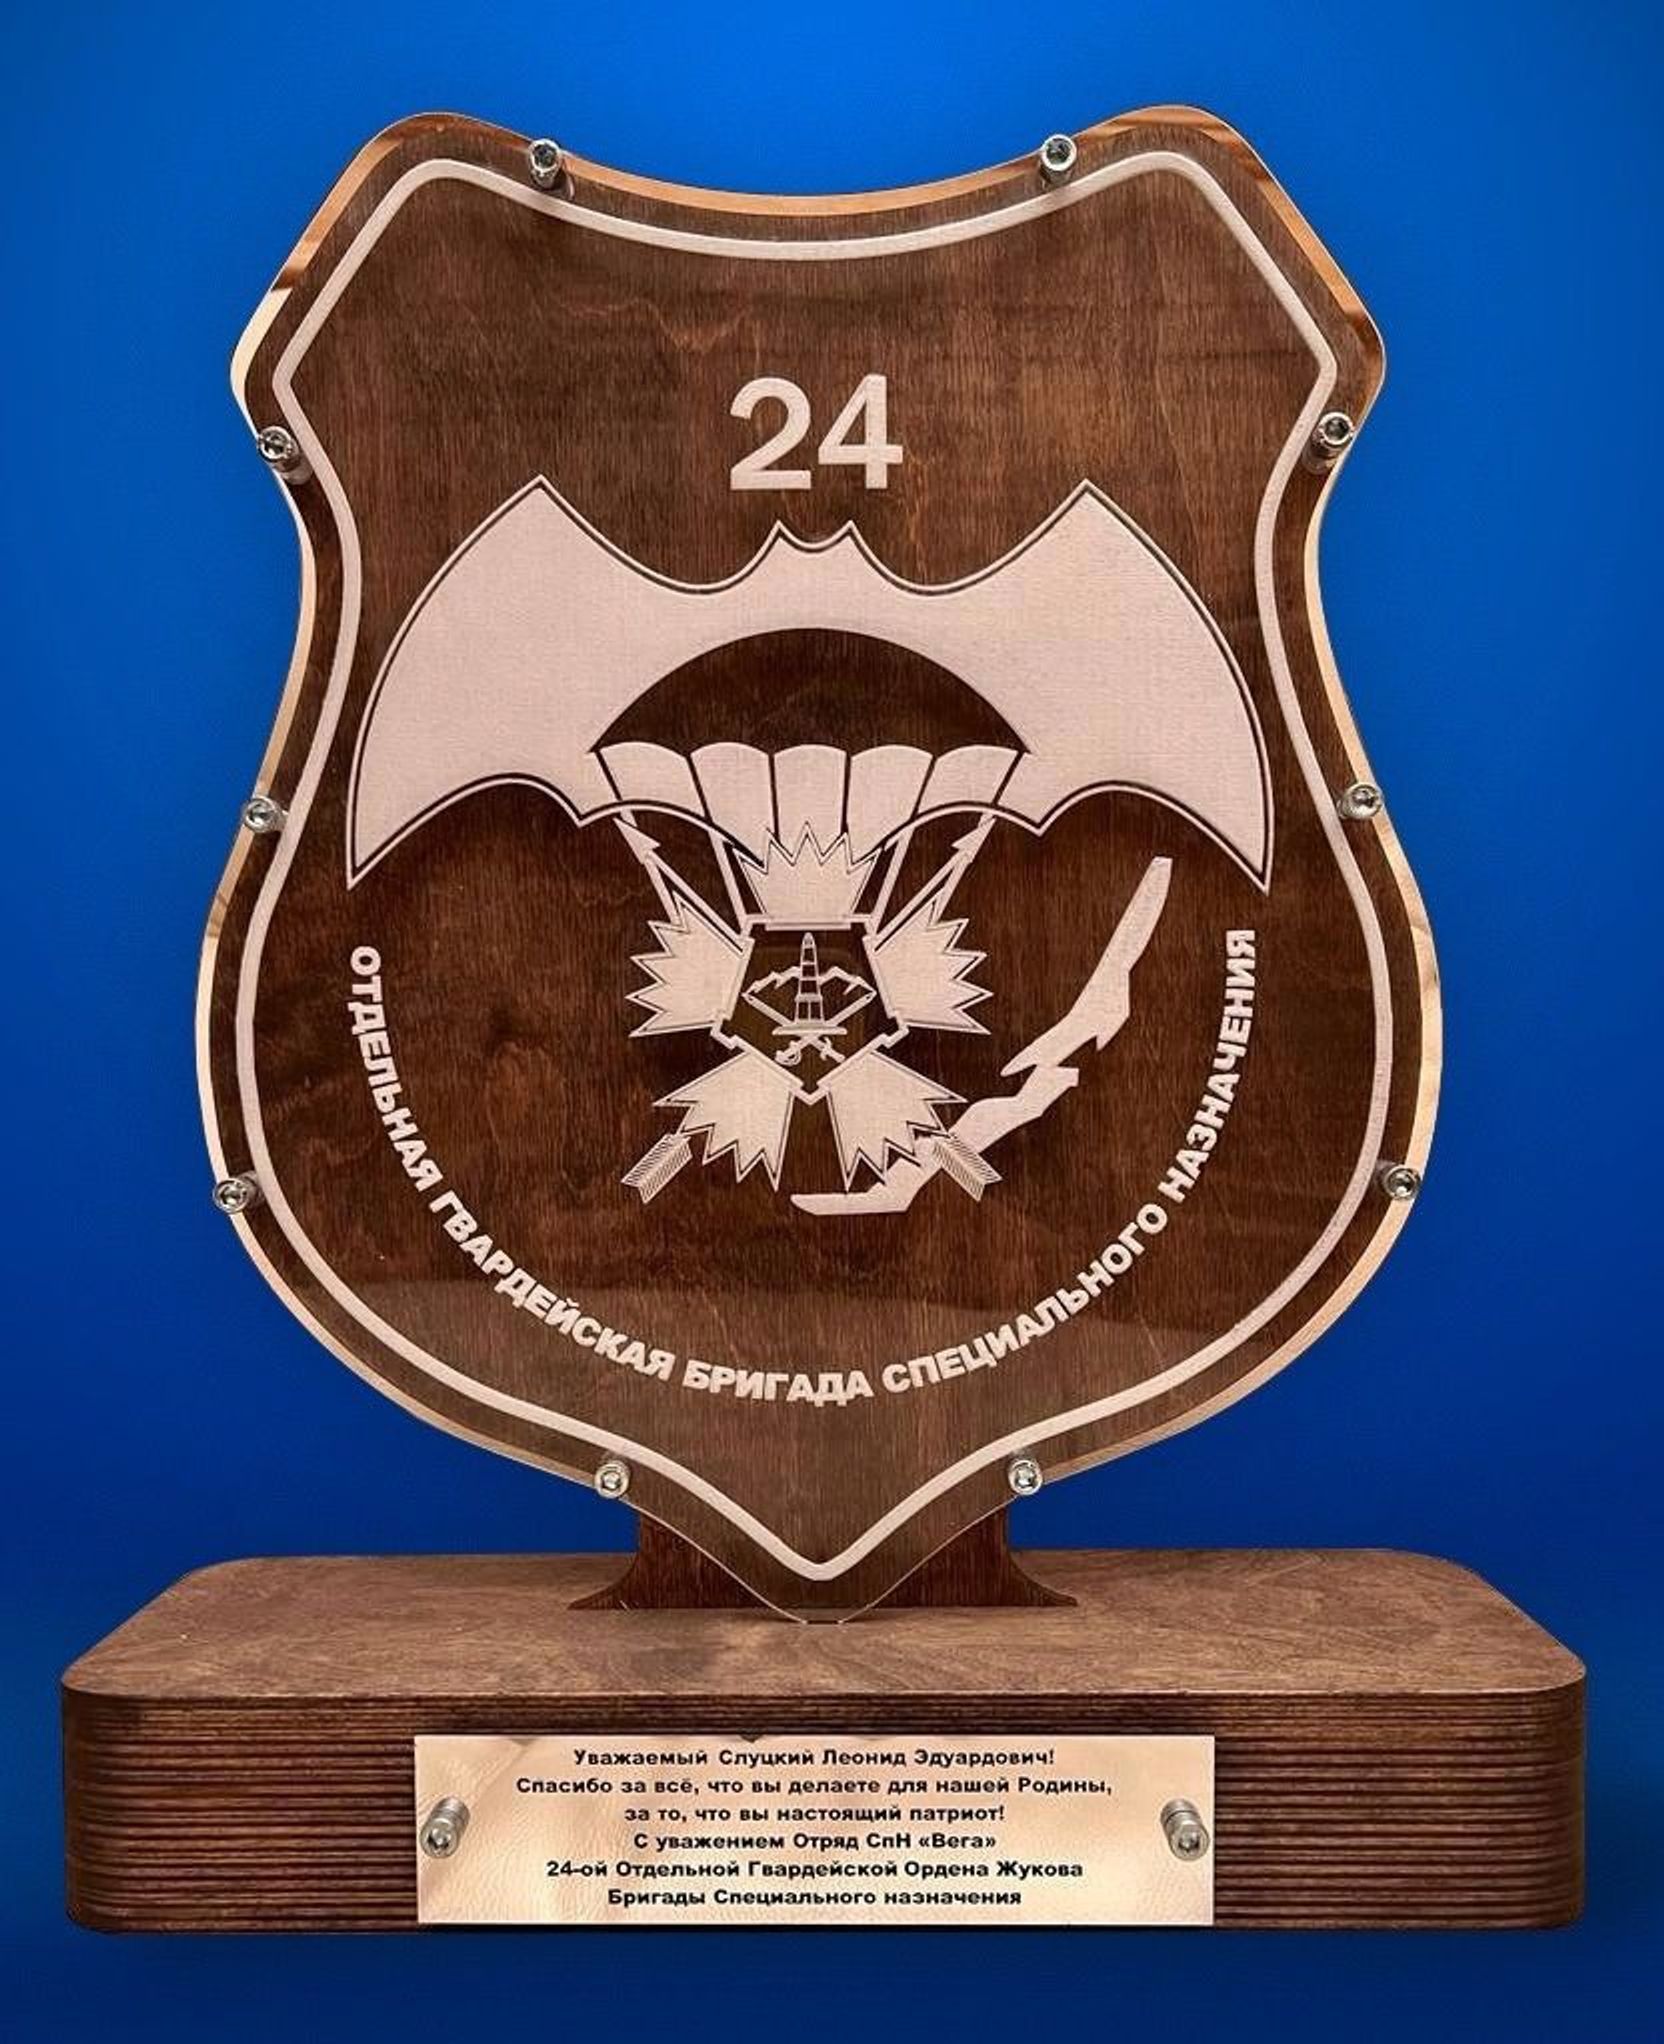 Slutsky's commemorative plaque from a GRU spetsnaz unit reading “Thank you for everything you do for our Motherland, for being a true patriot.”